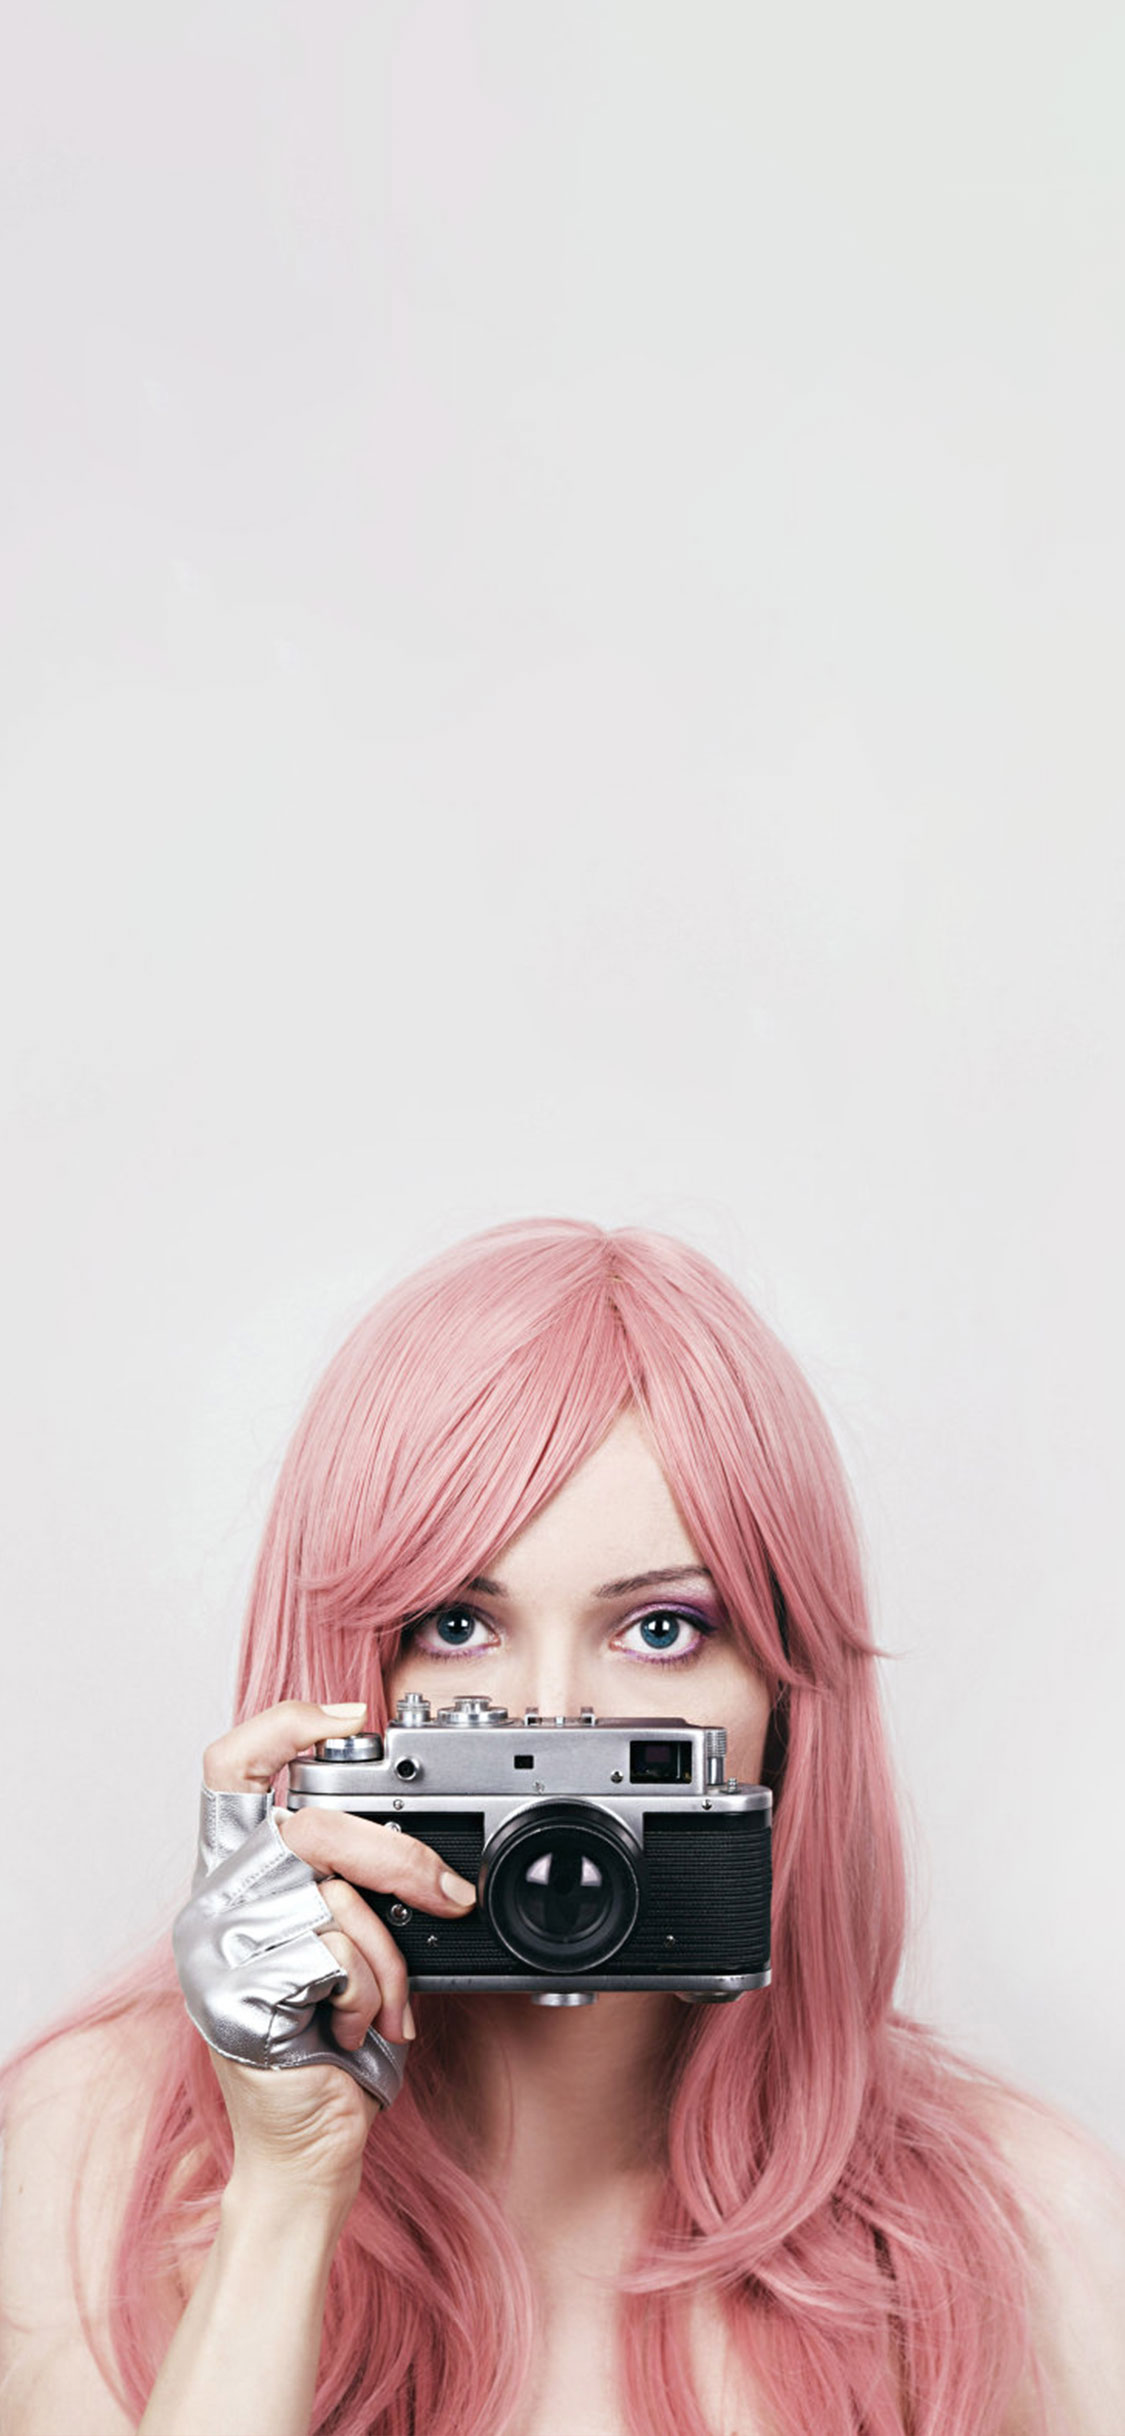 Cool Camera Wallpapers